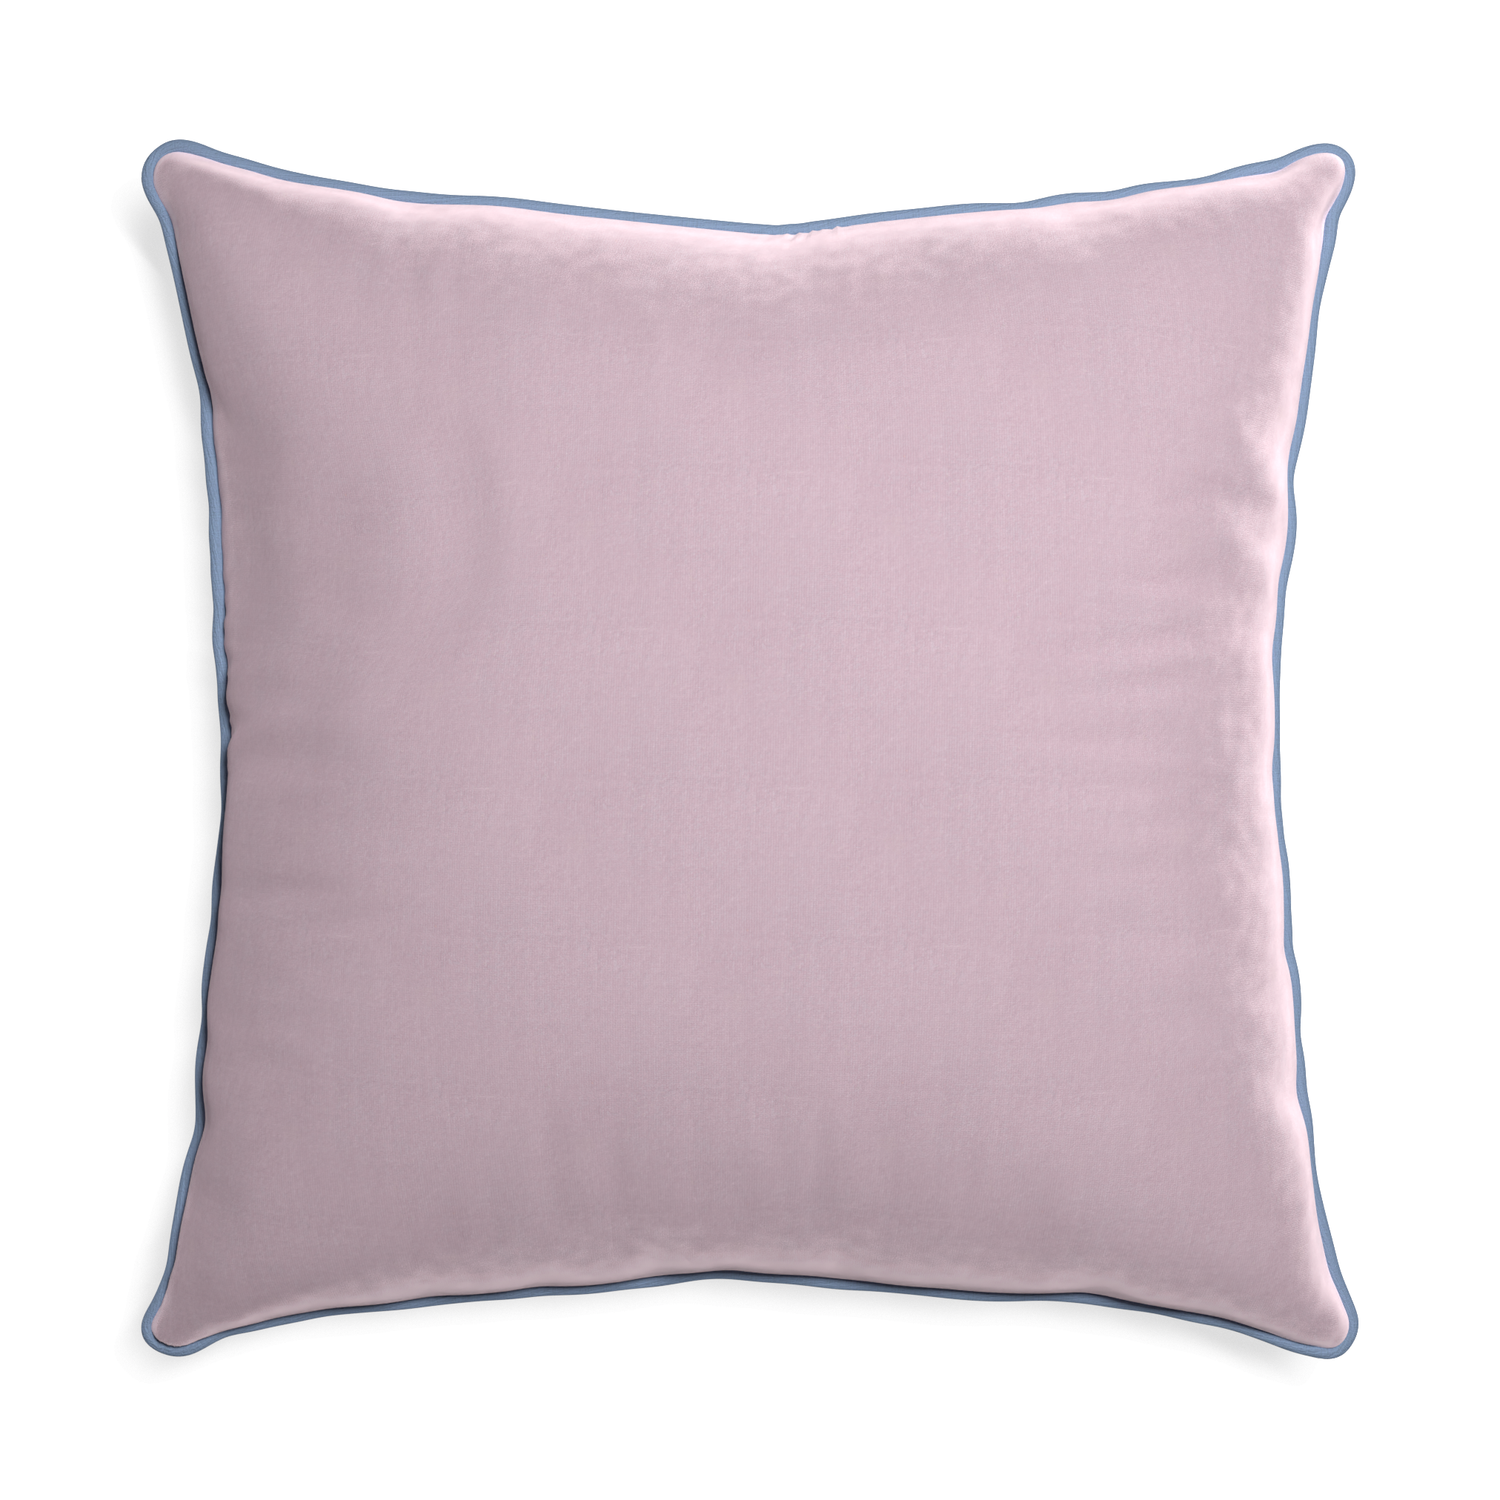 Euro-sham lilac velvet custom lilacpillow with sky piping on white background